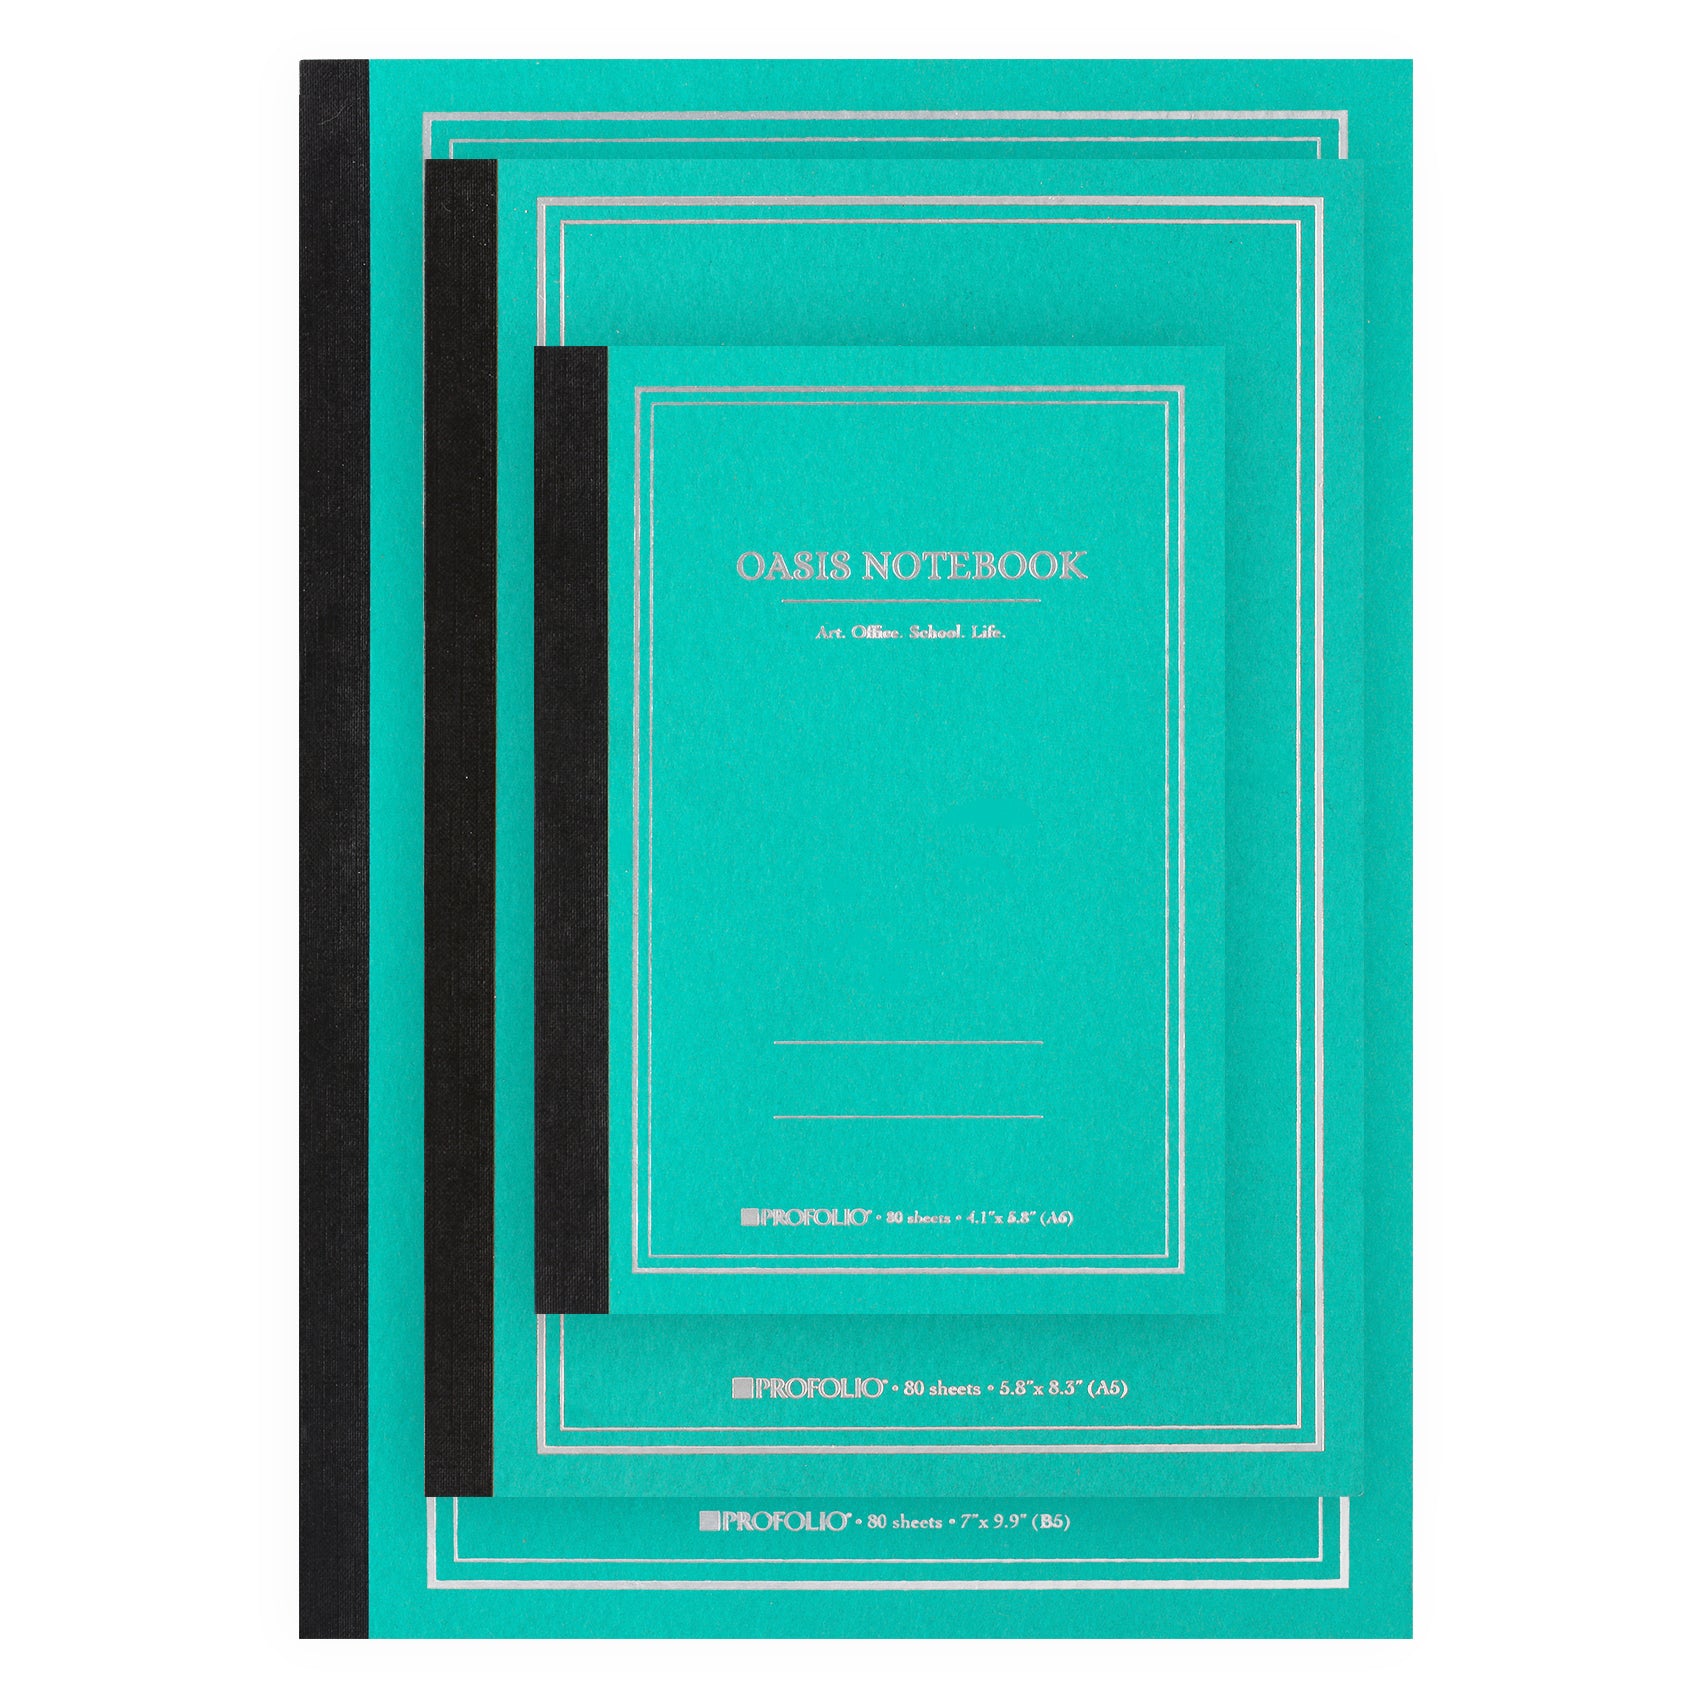 ProFolio Oasis Notebook Wintergreen | A6, A5 or B5 